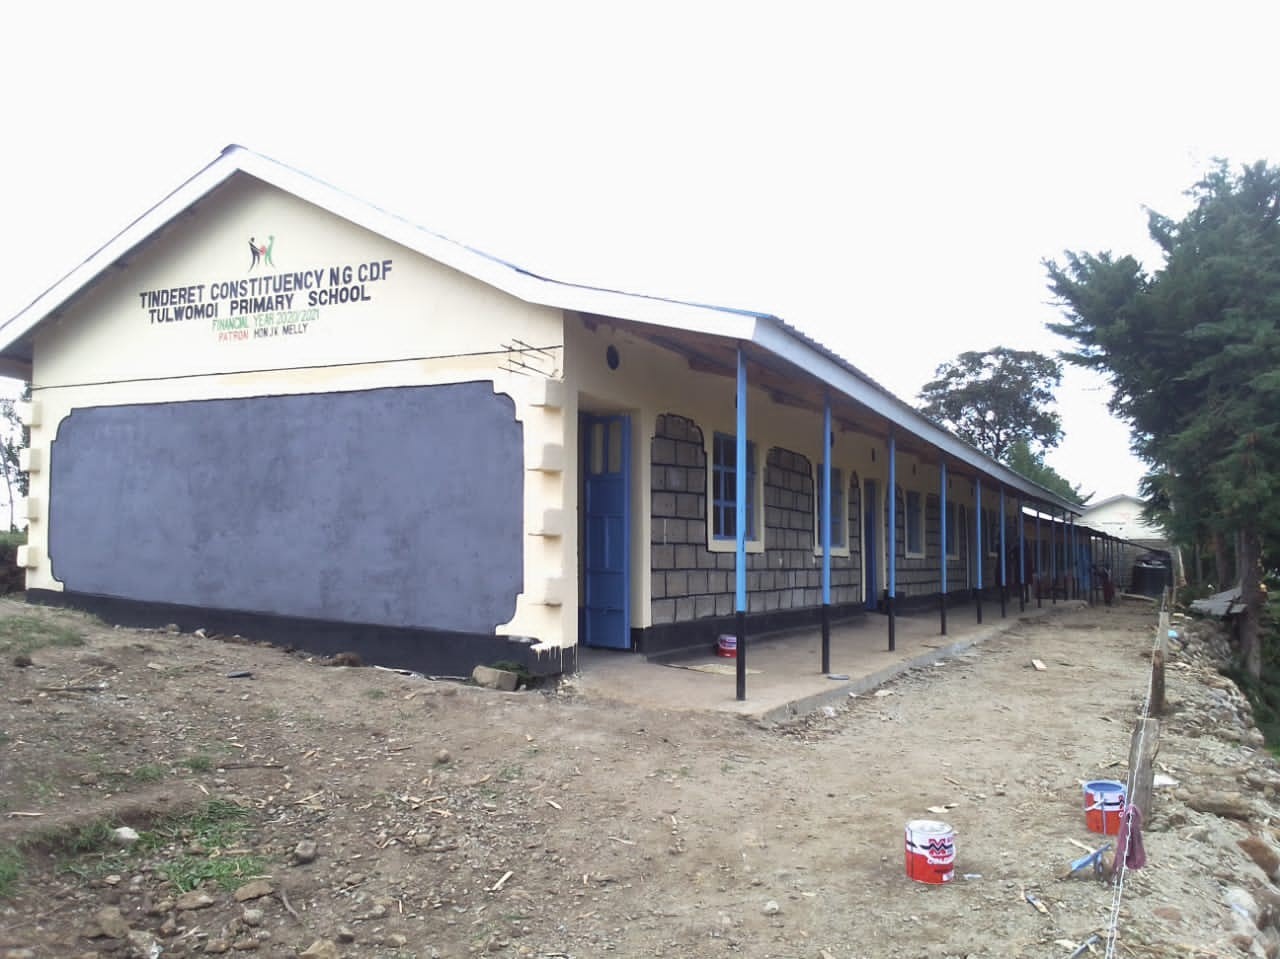 https://tinderet.ngcdf.go.ke/wp-content/uploads/2022/01/Construction-of-two-classrooms-at-Tulwo-Moi-Primary-in-Tinderet-Ward.jpg